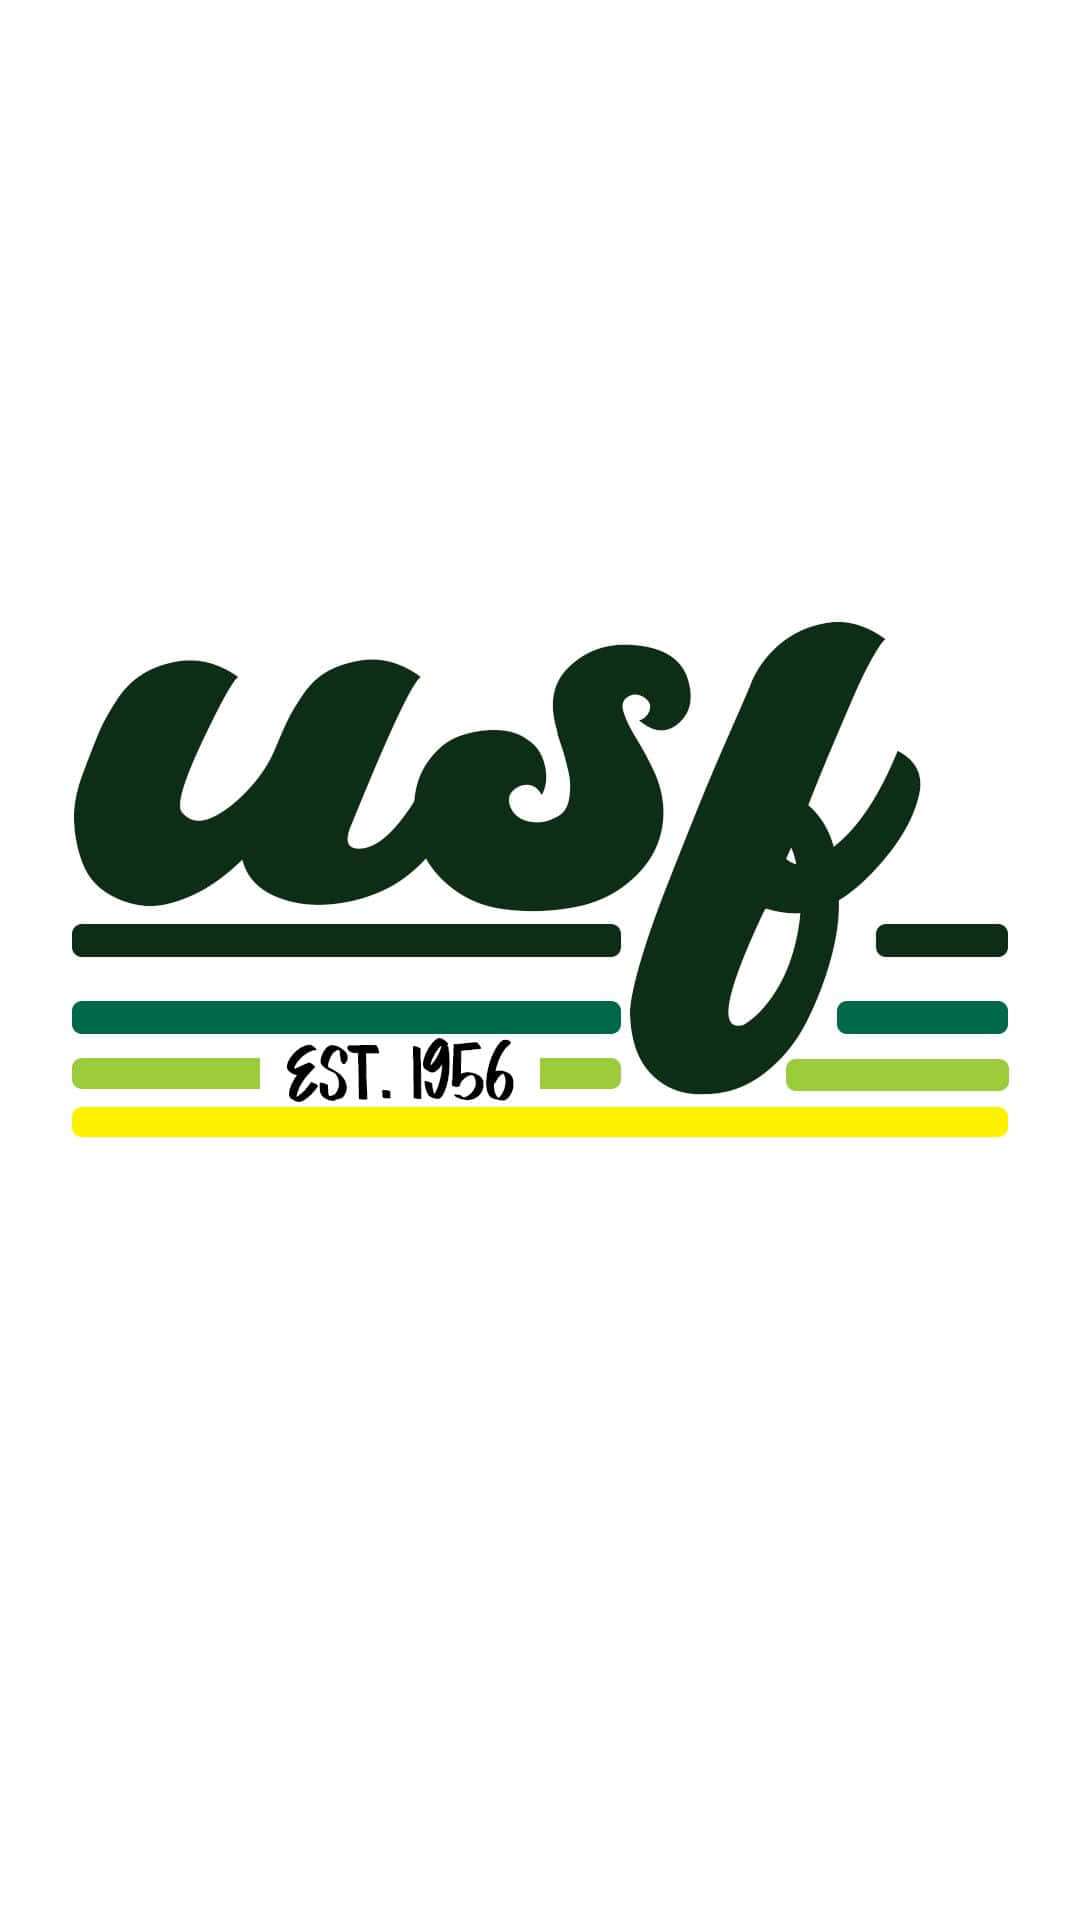 Aesthetic View of University of South Florida Campus Wallpaper